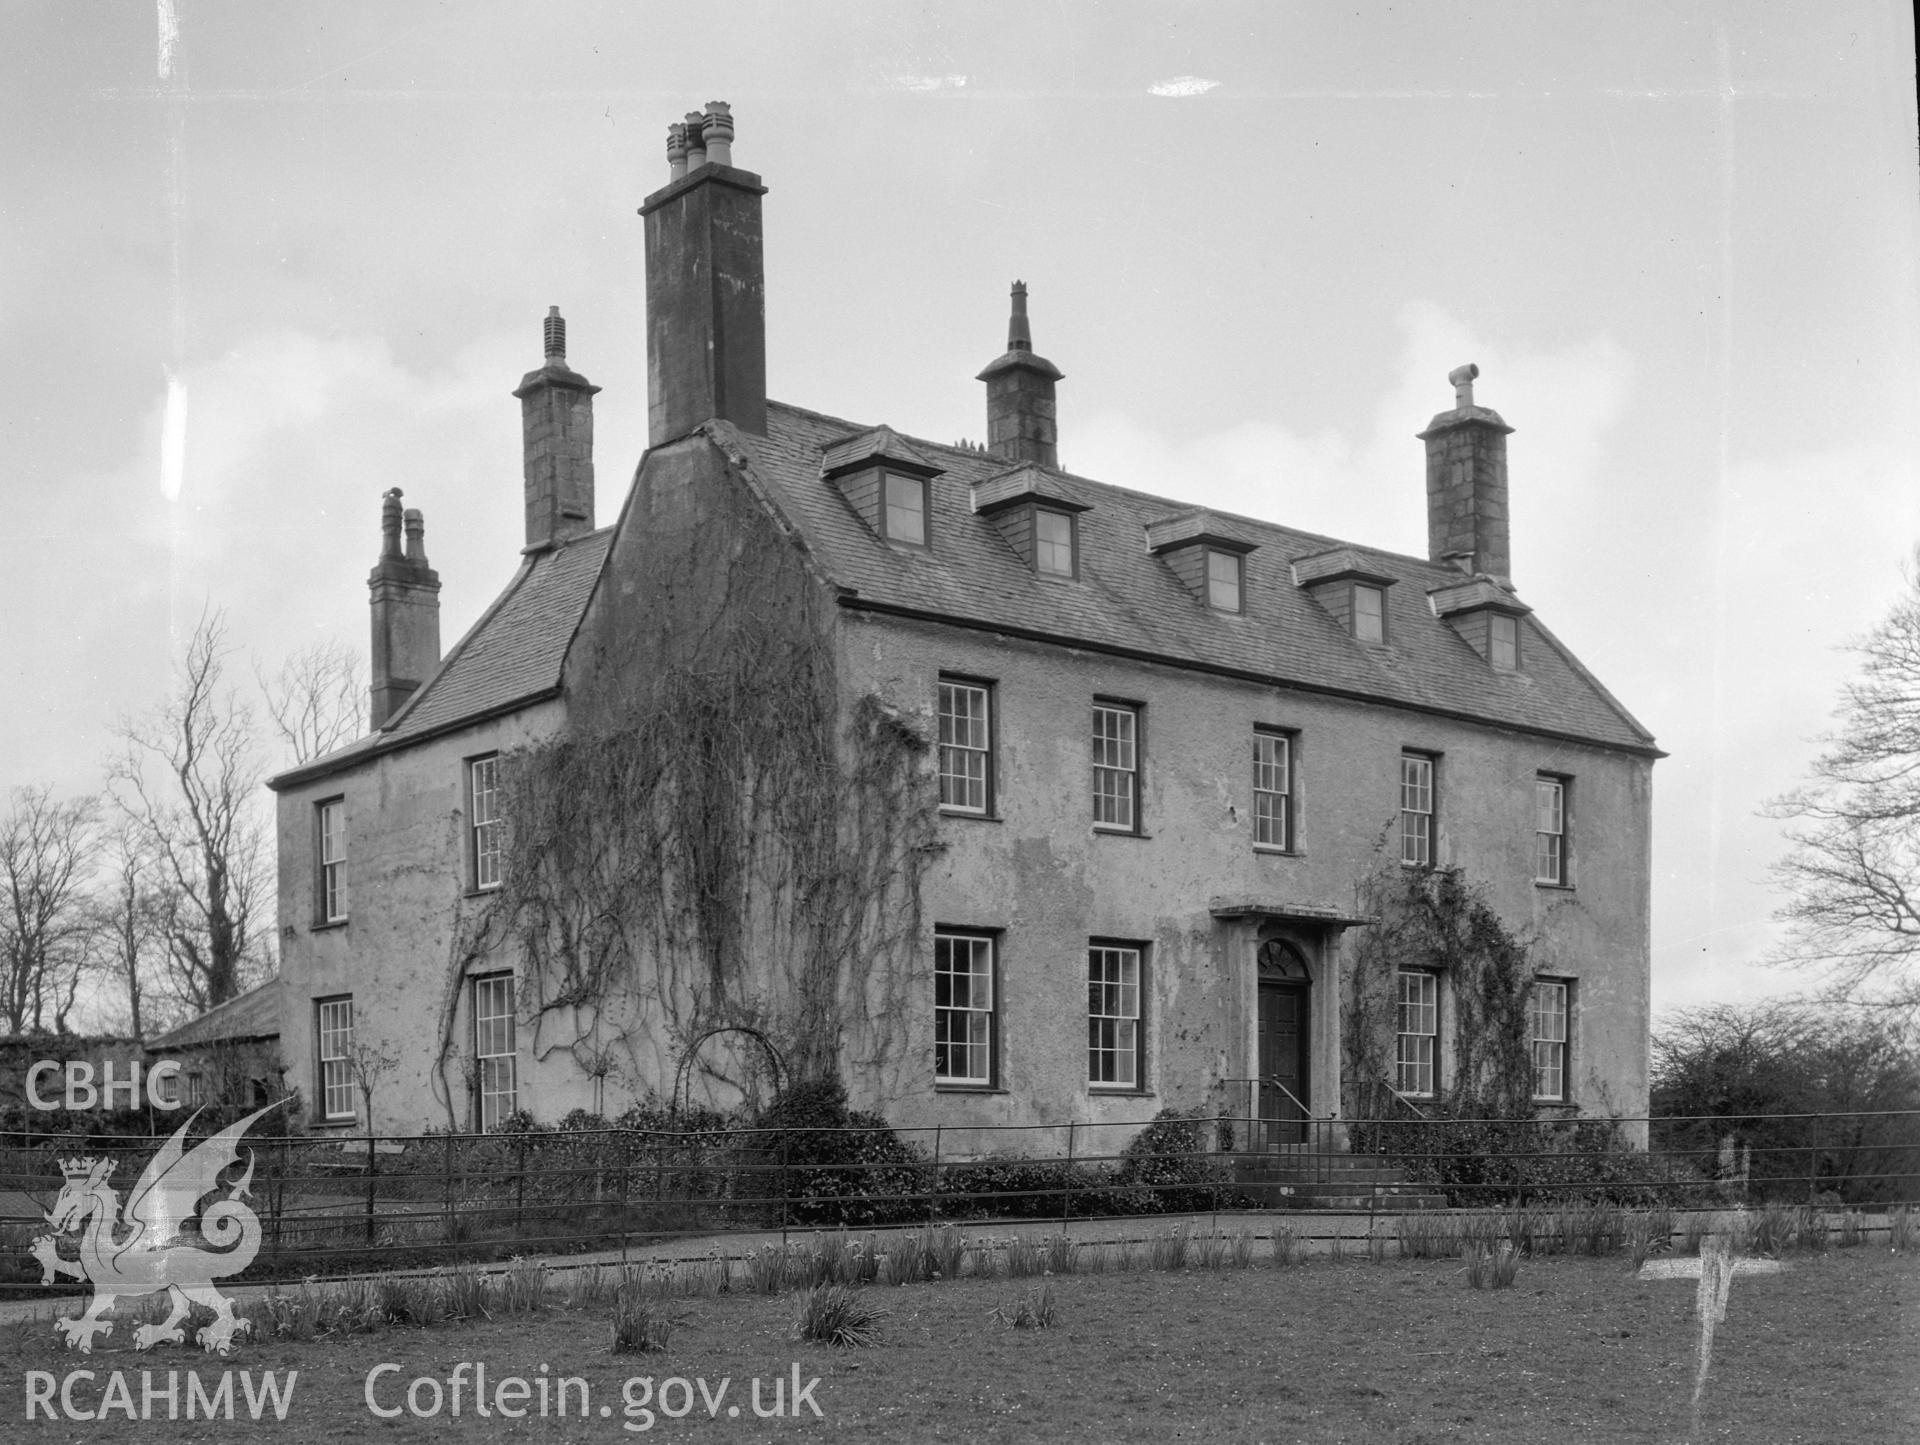 Descriptive account of Plas Llanddyfnan, Llanddyfnan, including investigator's report, photocopy of extract from RCAHMW inventory, and ablack and white photograph from 1960.